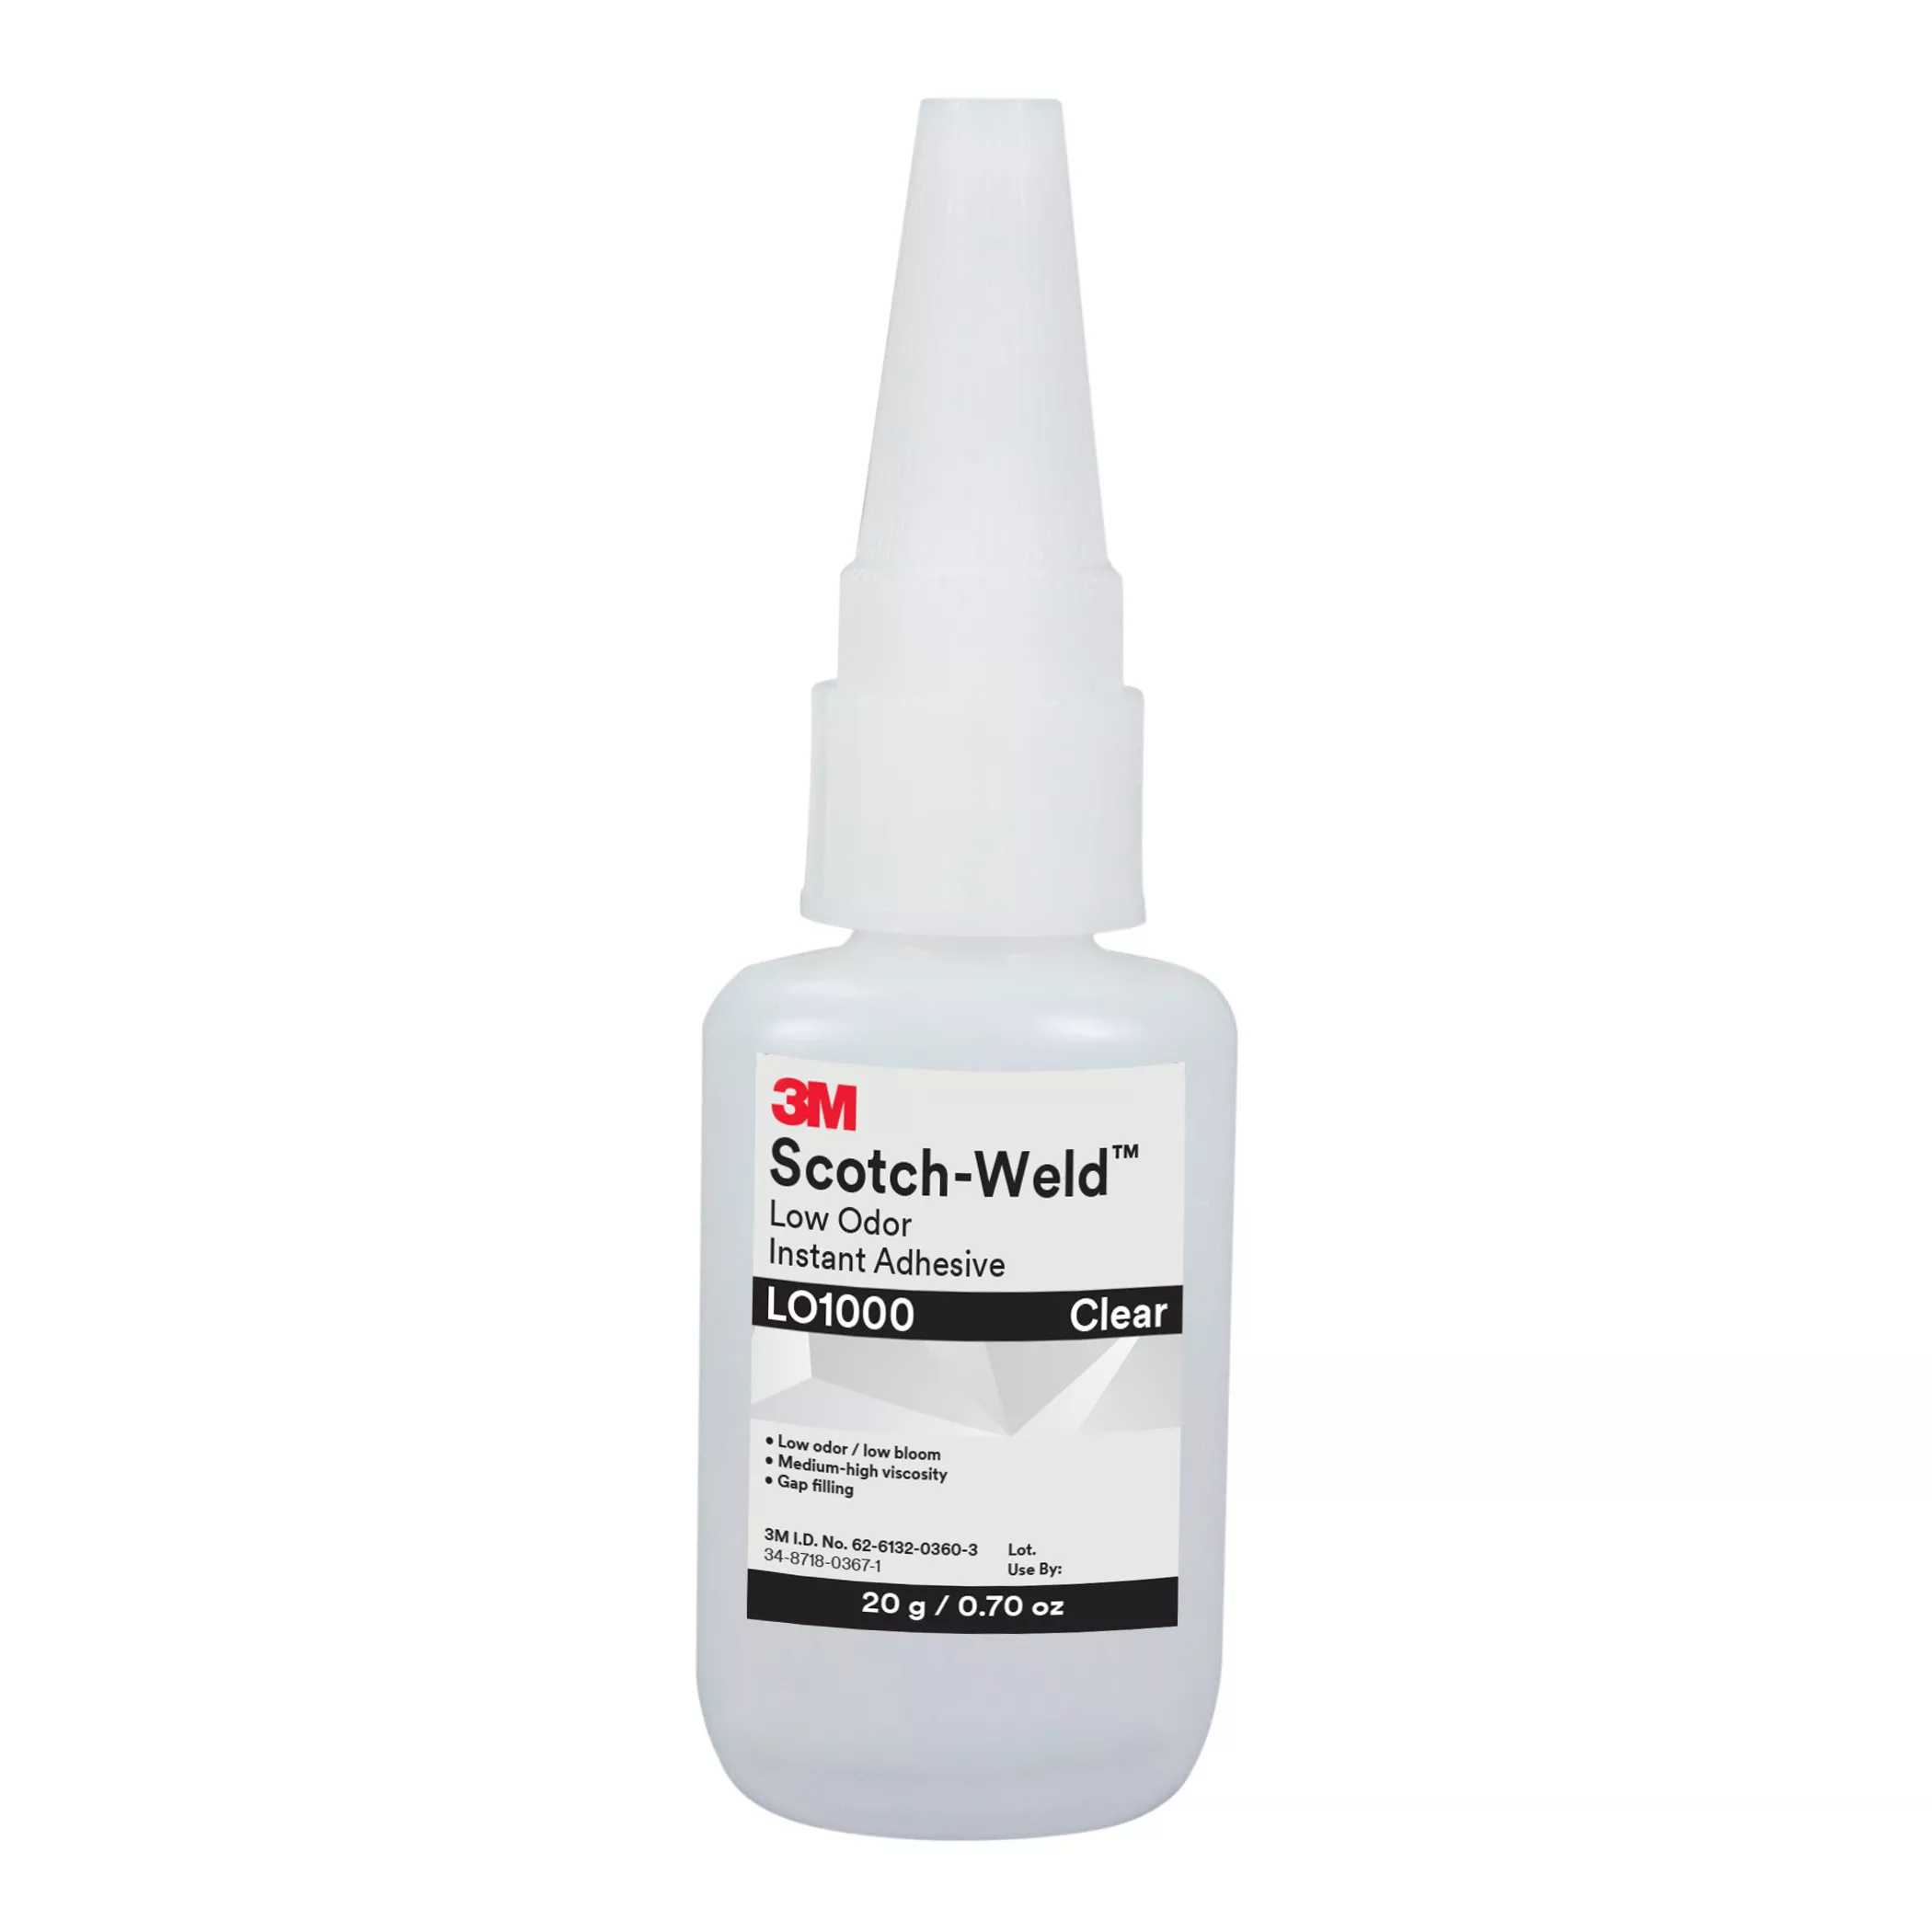 3M™ Scotch-Weld™ Low Odor Instant Adhesive LO1000, Clear, 20 Gram
Bottle, 10/case